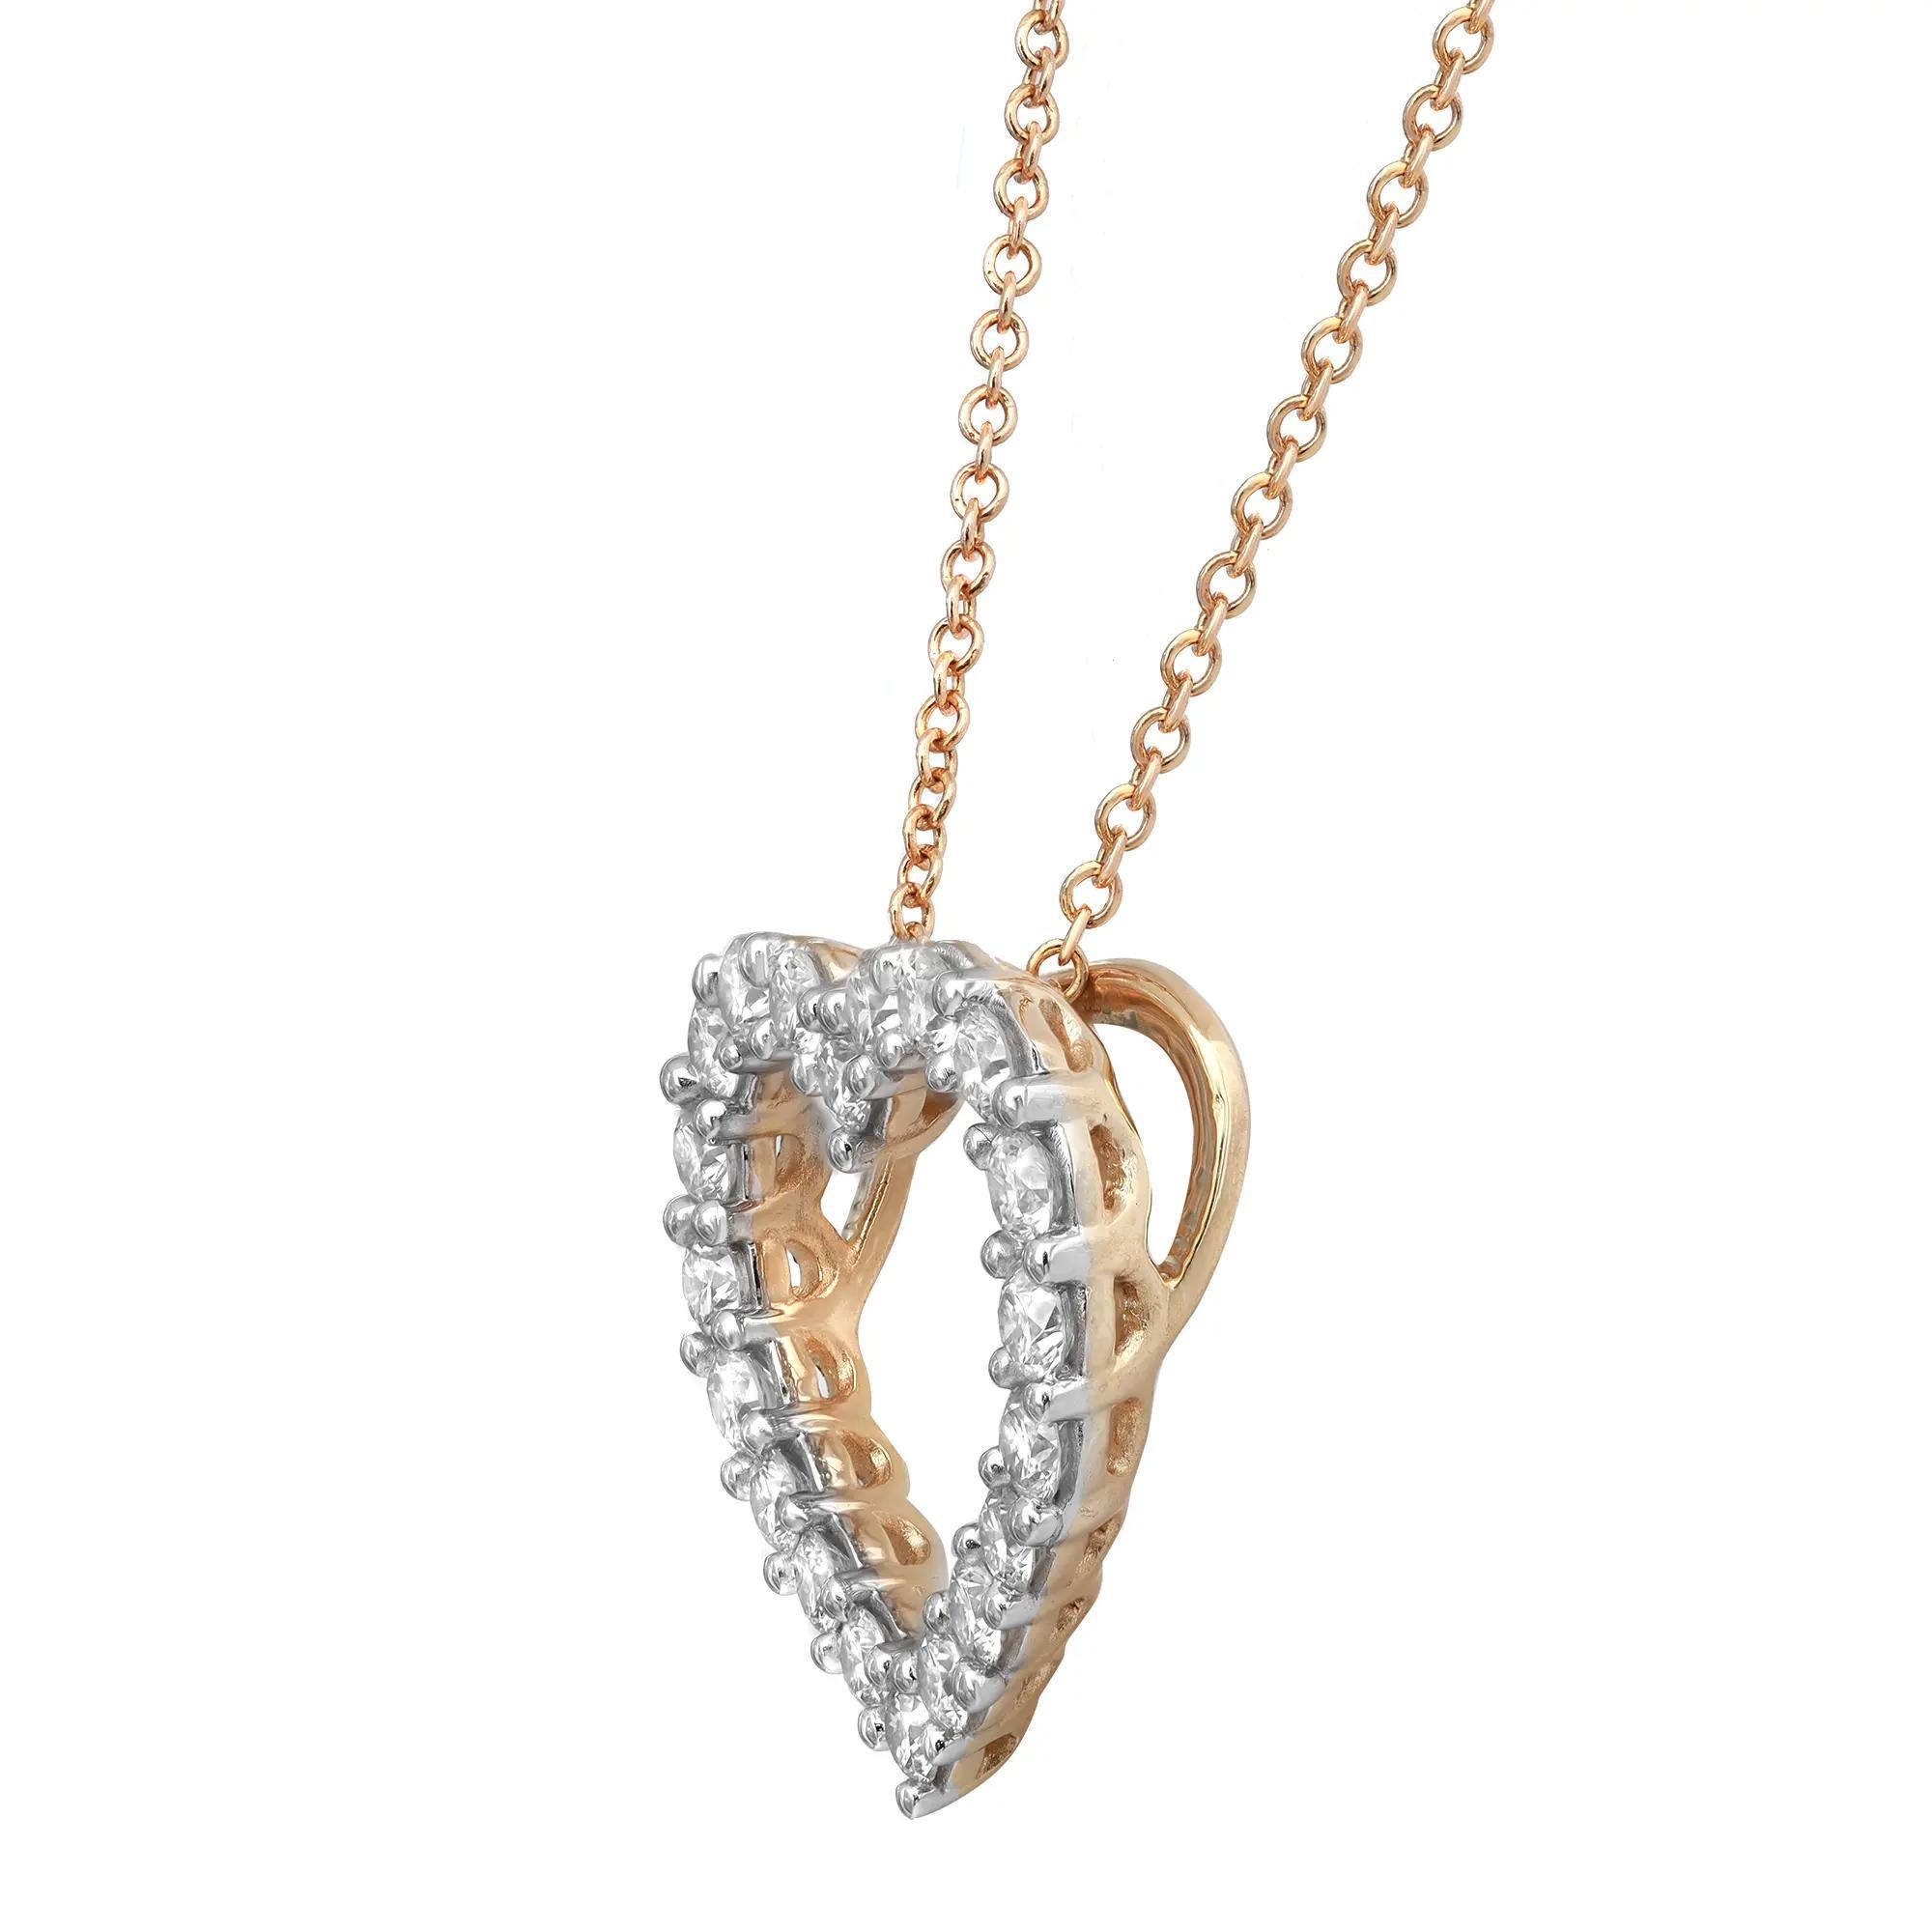 This classic natural diamond heart pendant showcases prong set white sparkling round cut diamonds in a heart-shaped cut out design. Crafted in 14K yellow gold. Total diamond weight: 1.00 carat. Each diamond is of VS-SI clarity and H-I color. This